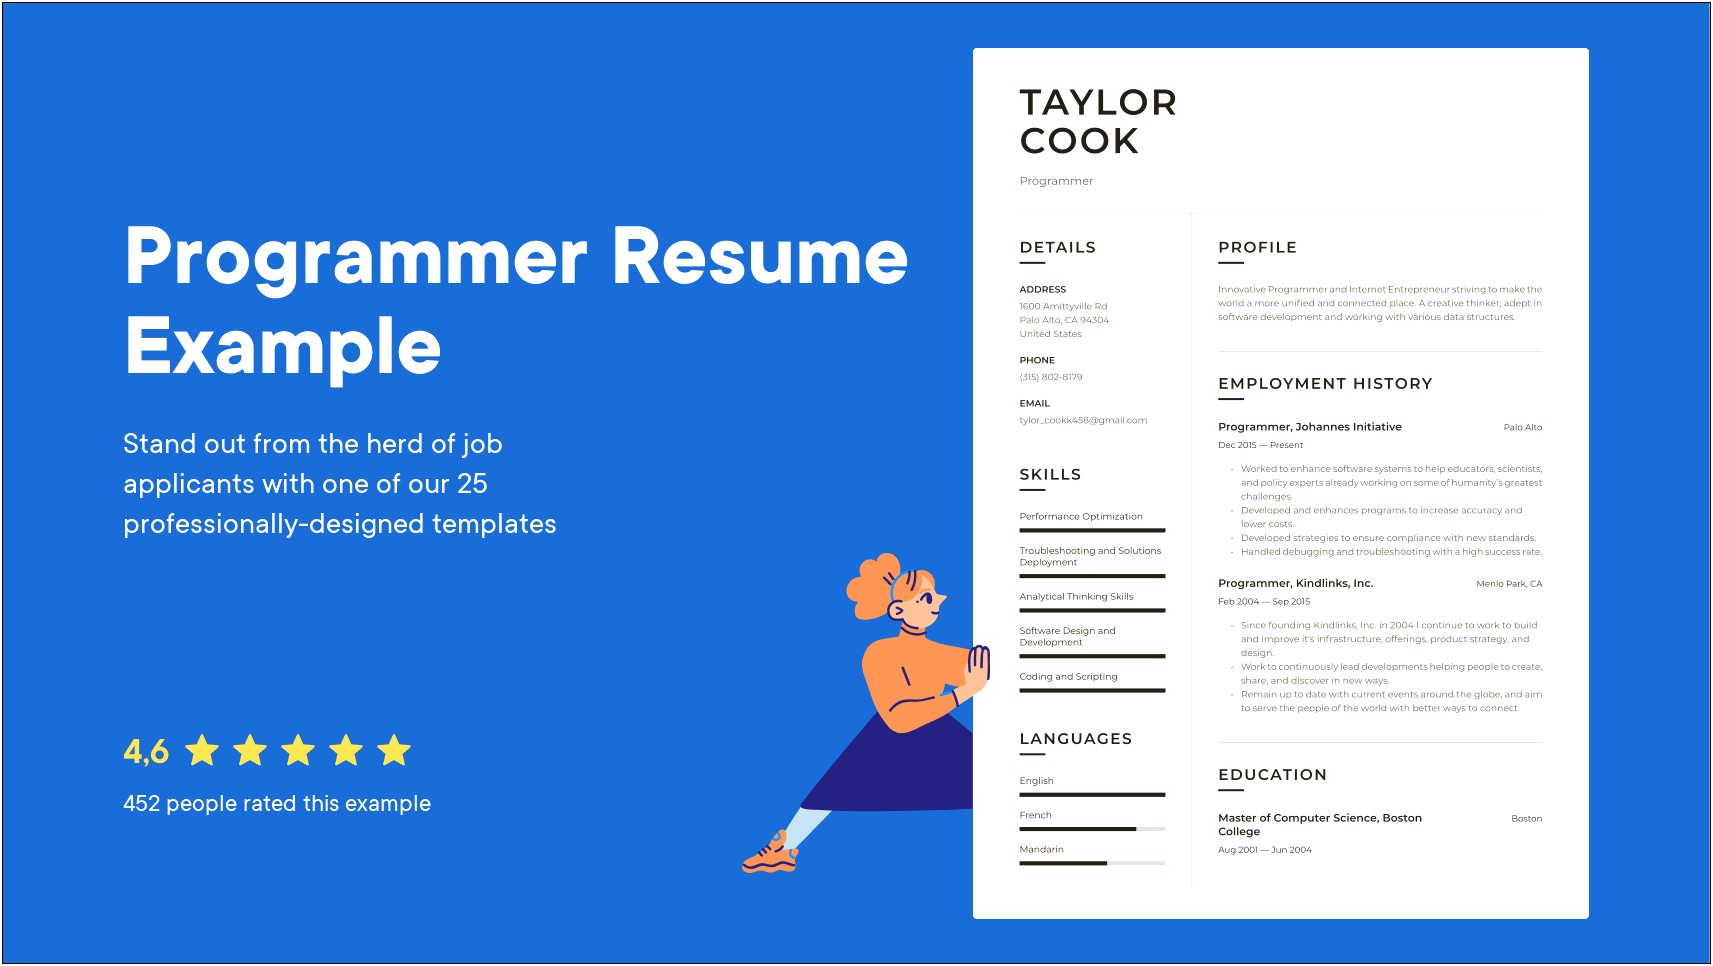 Work Performed Summary Resume Computer Programmer Examples